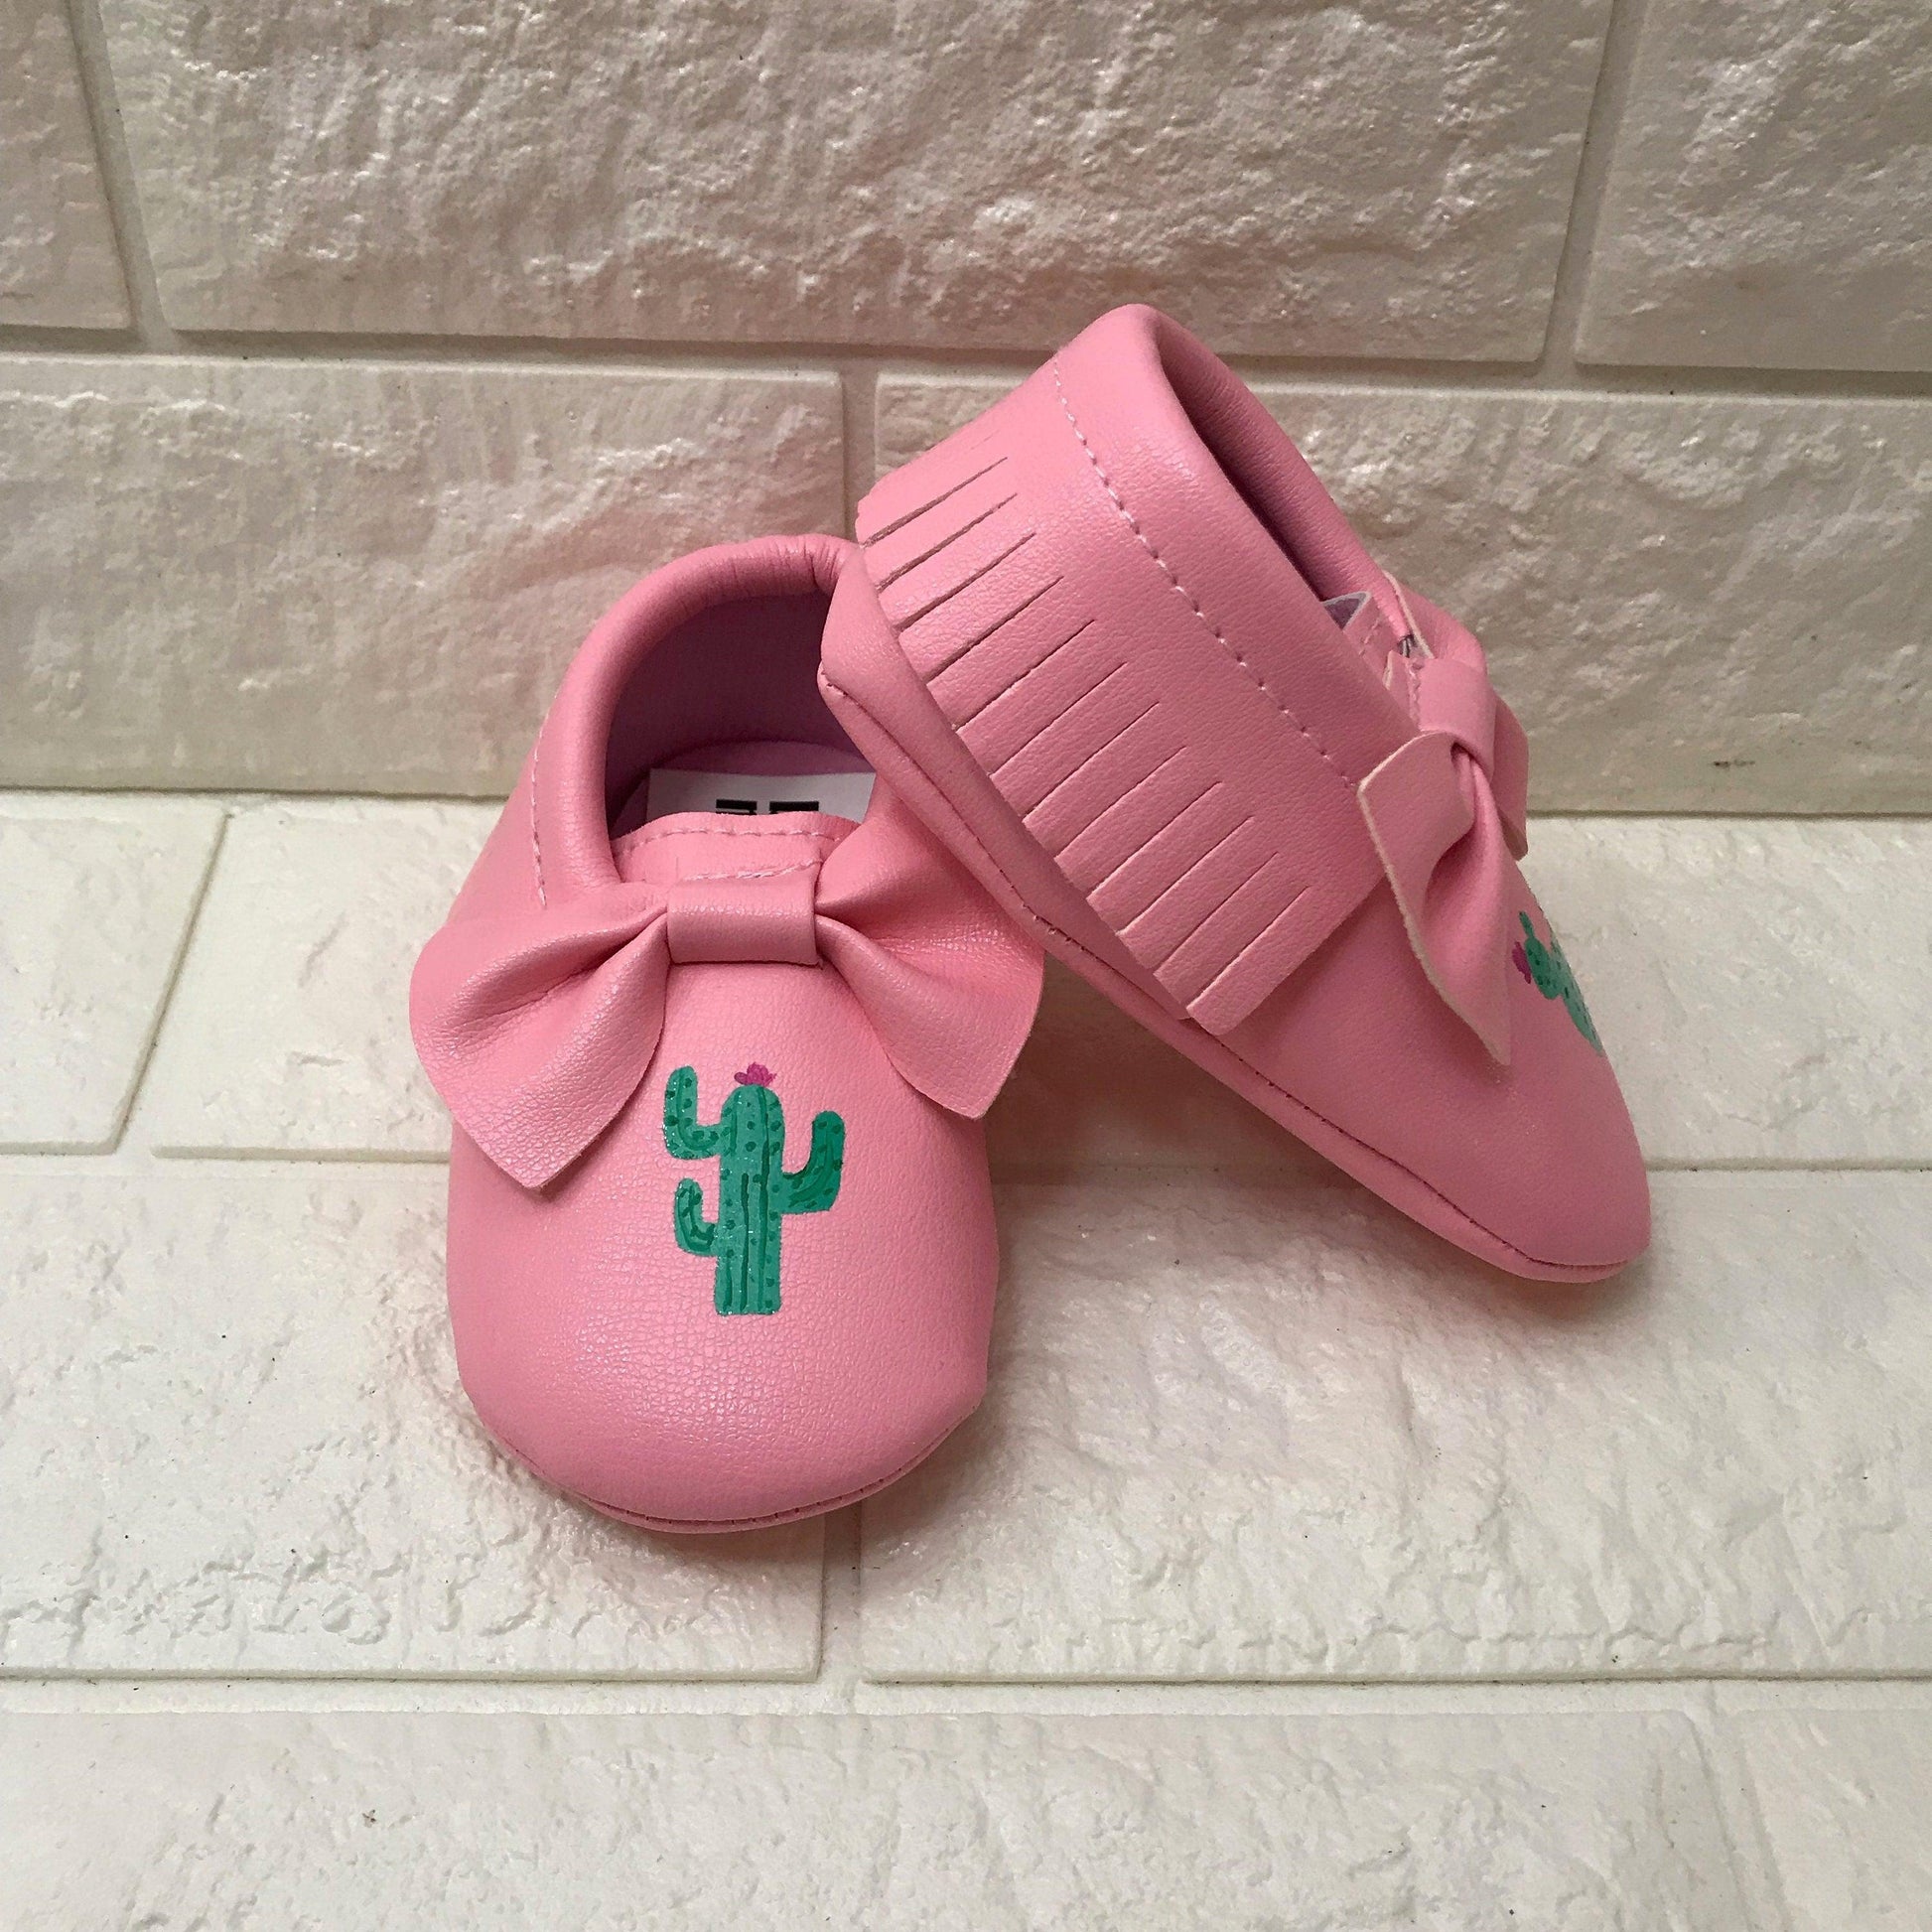 Cactus Moccasins-Shoes-ButterMakesMeHappy